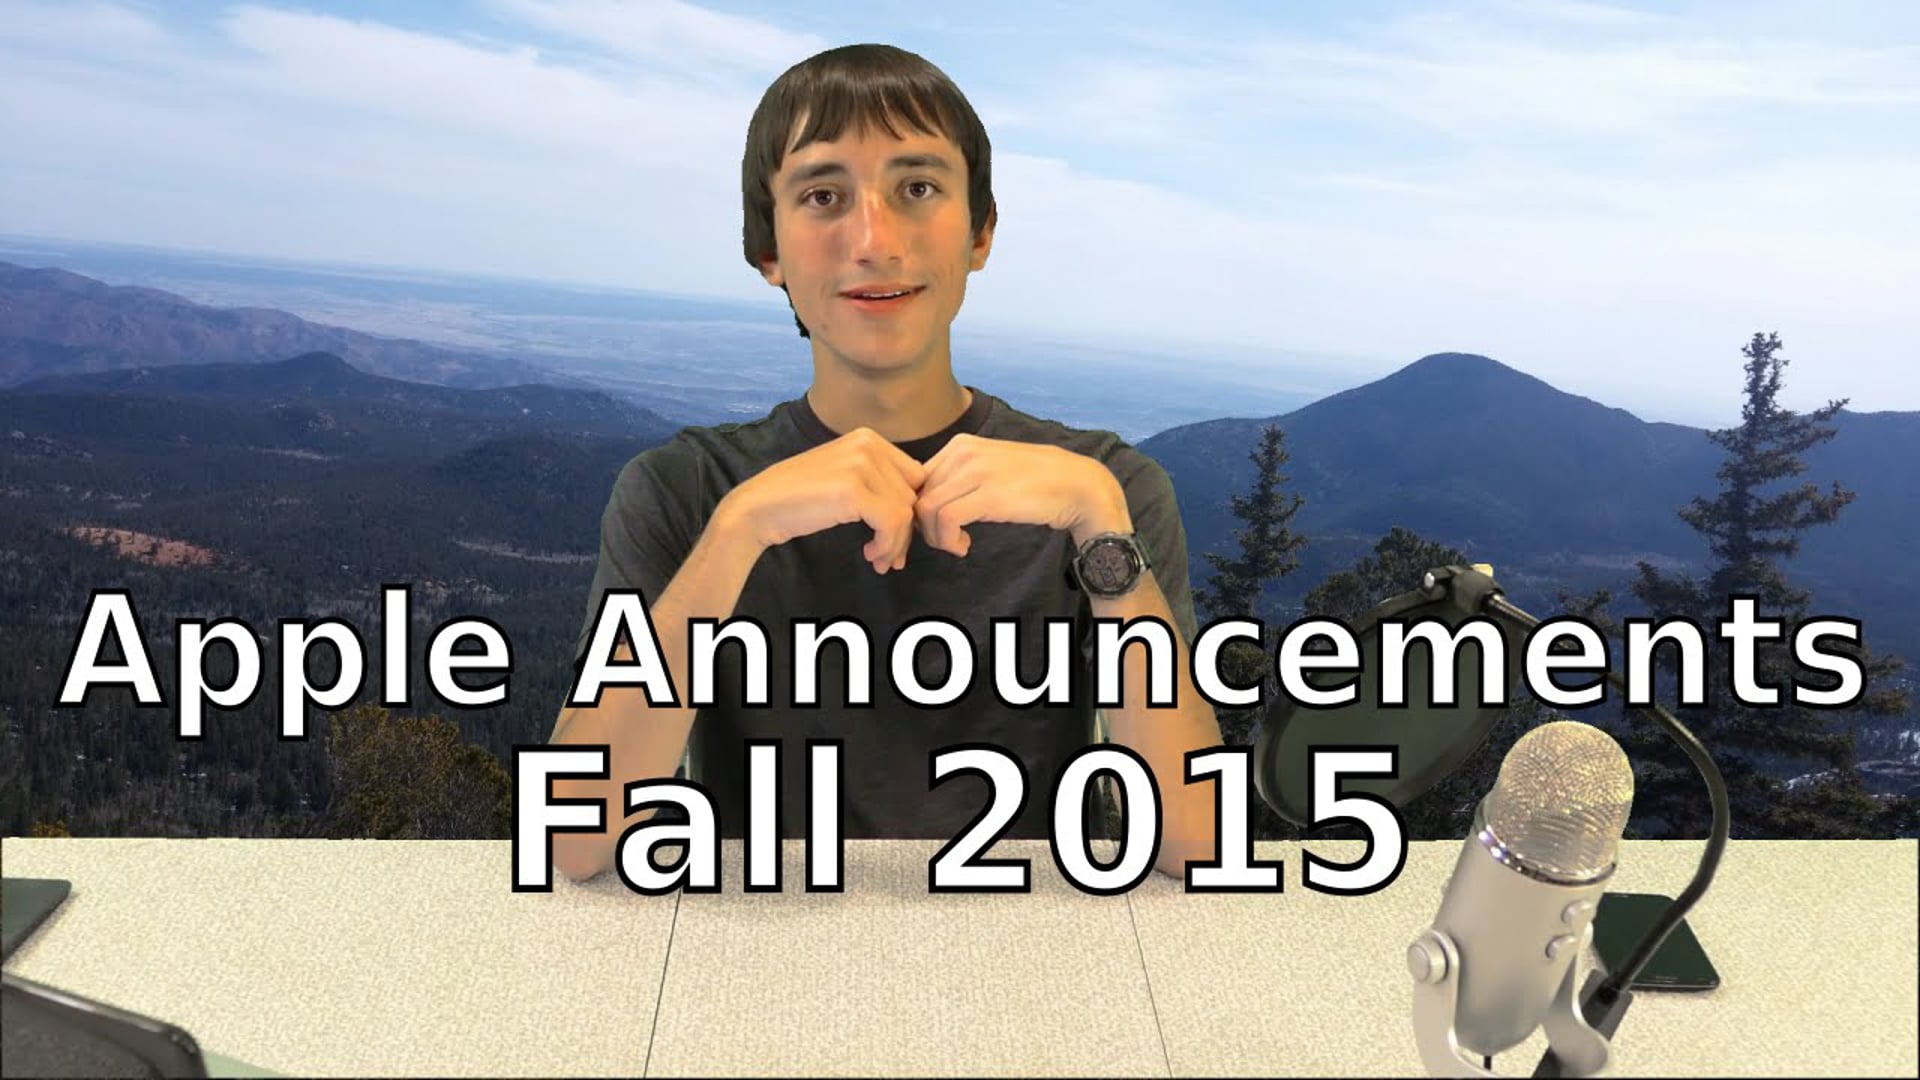 Apple Announcements - Fall 2015